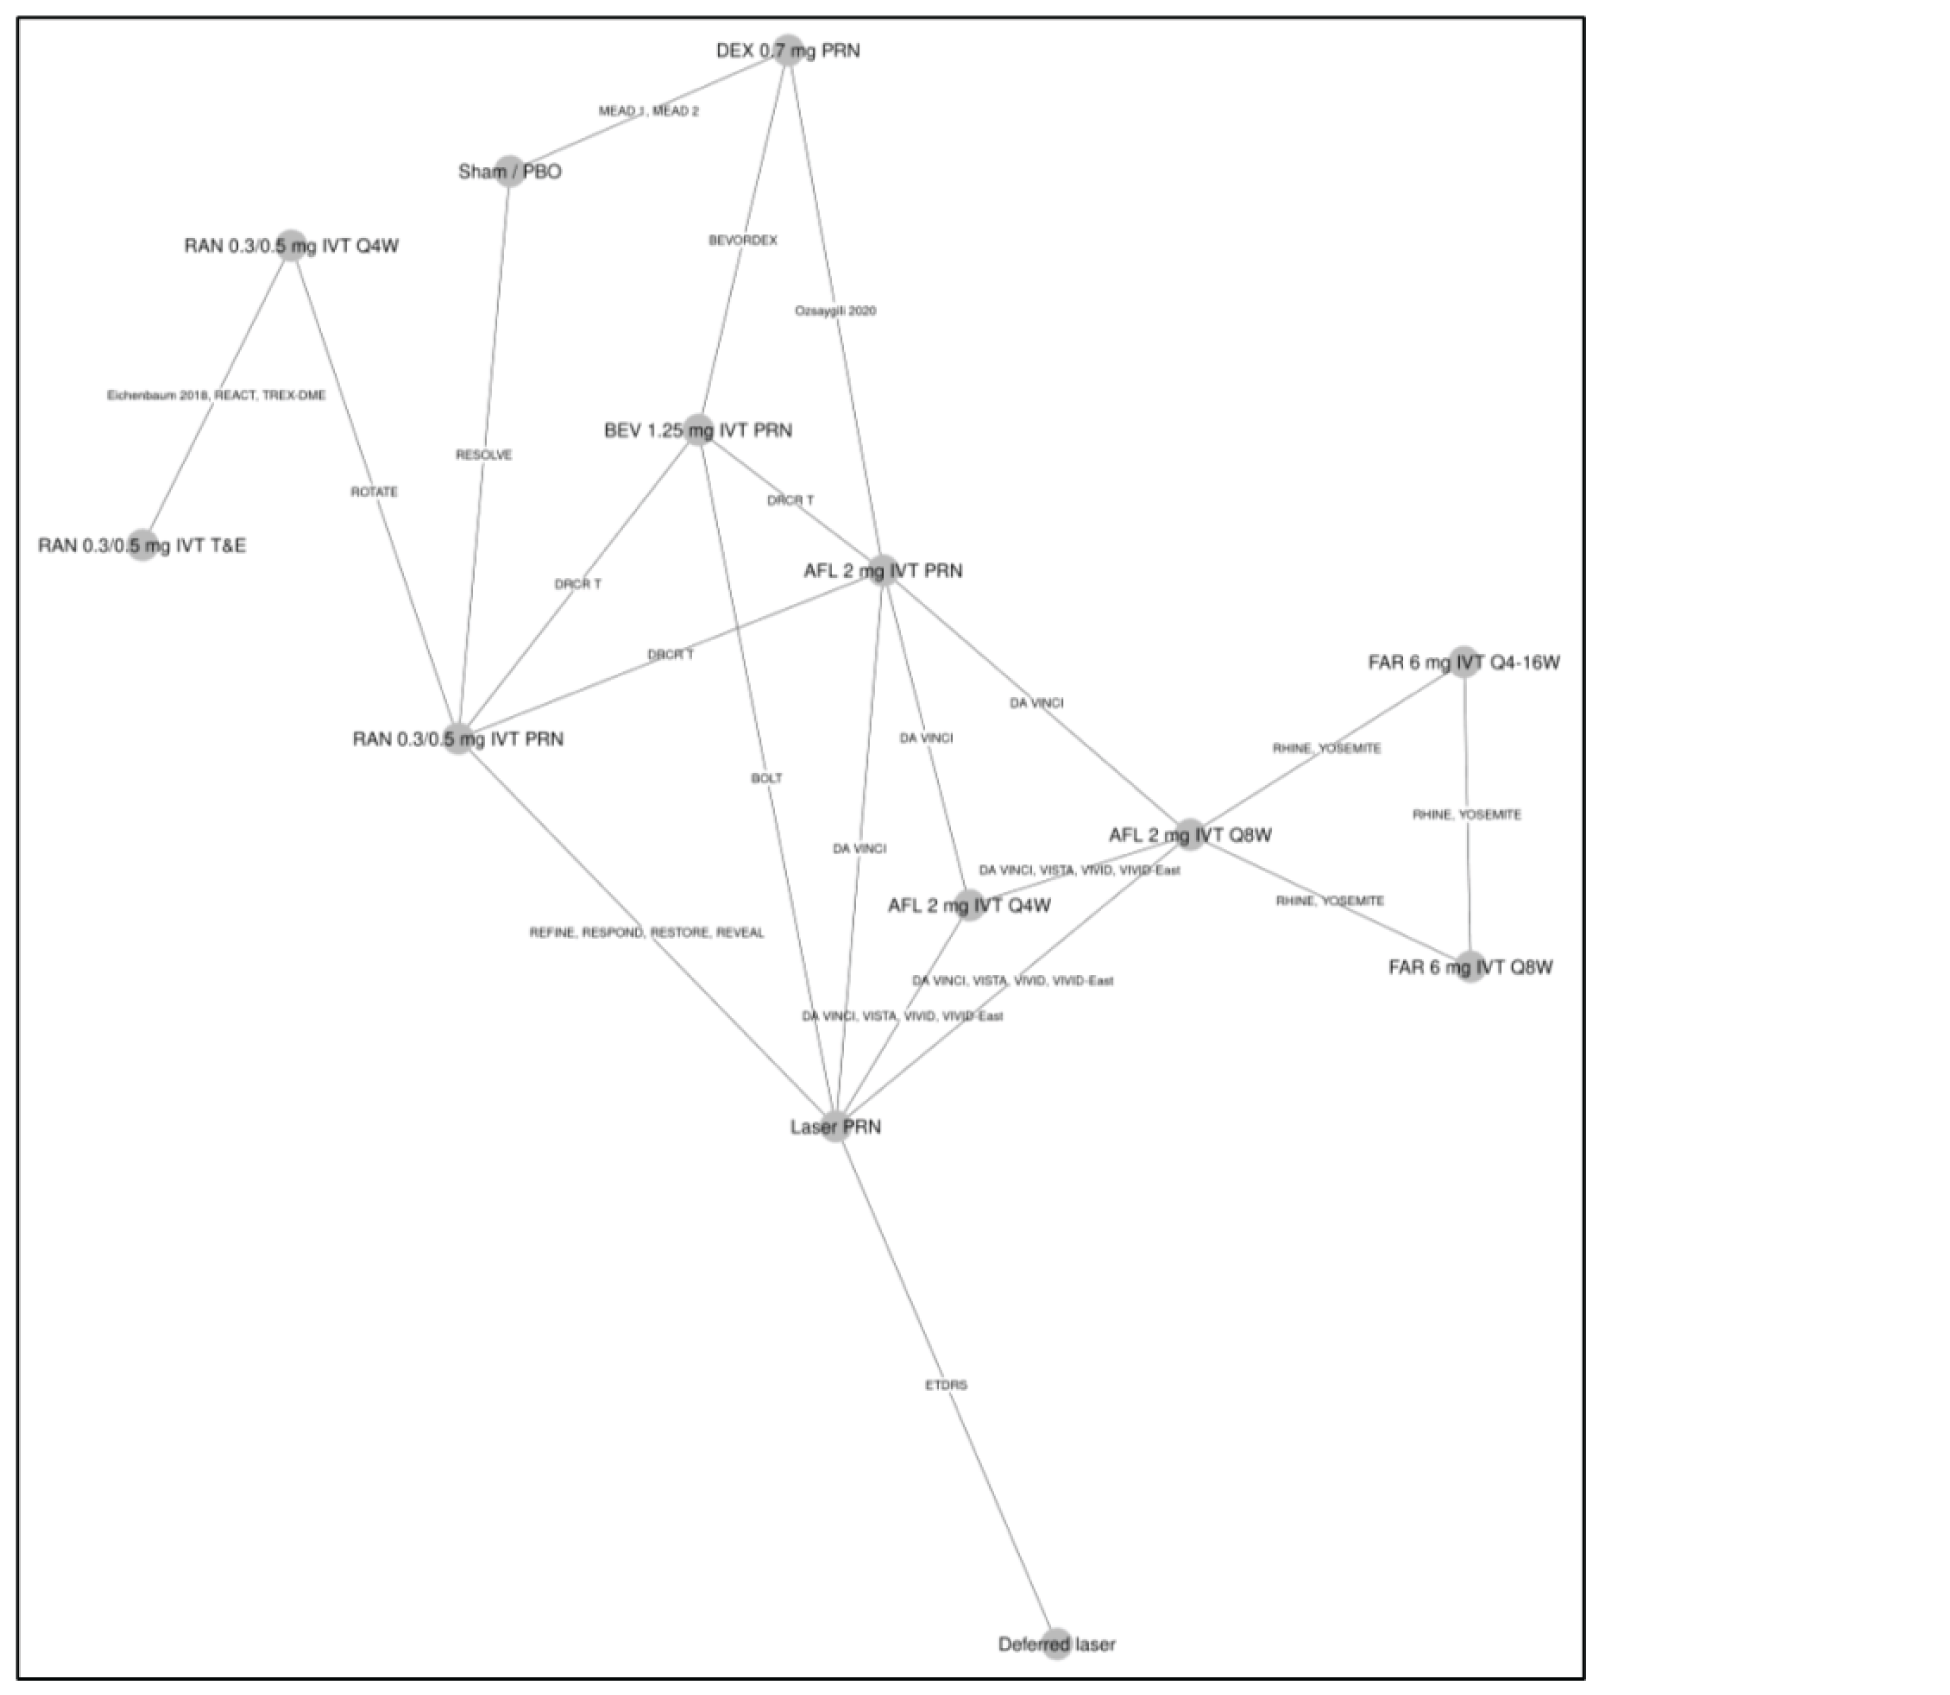 Twenty-two trials reported on the proportion of patients gaining or losing at least 10 or at least 15 ETDRS letters at 12 months and were connected in a network. There are 4 connected star diagrams with 5 or more connections: ranibizumab 0.3 mg/0.5 mg IVT PRN; aflibercept 2 mg IVT PRN; and aflibercept 2 mg IVT q.8.w. and laser PRN. The most common connection was aflibercept 2 mg IVT PRN.